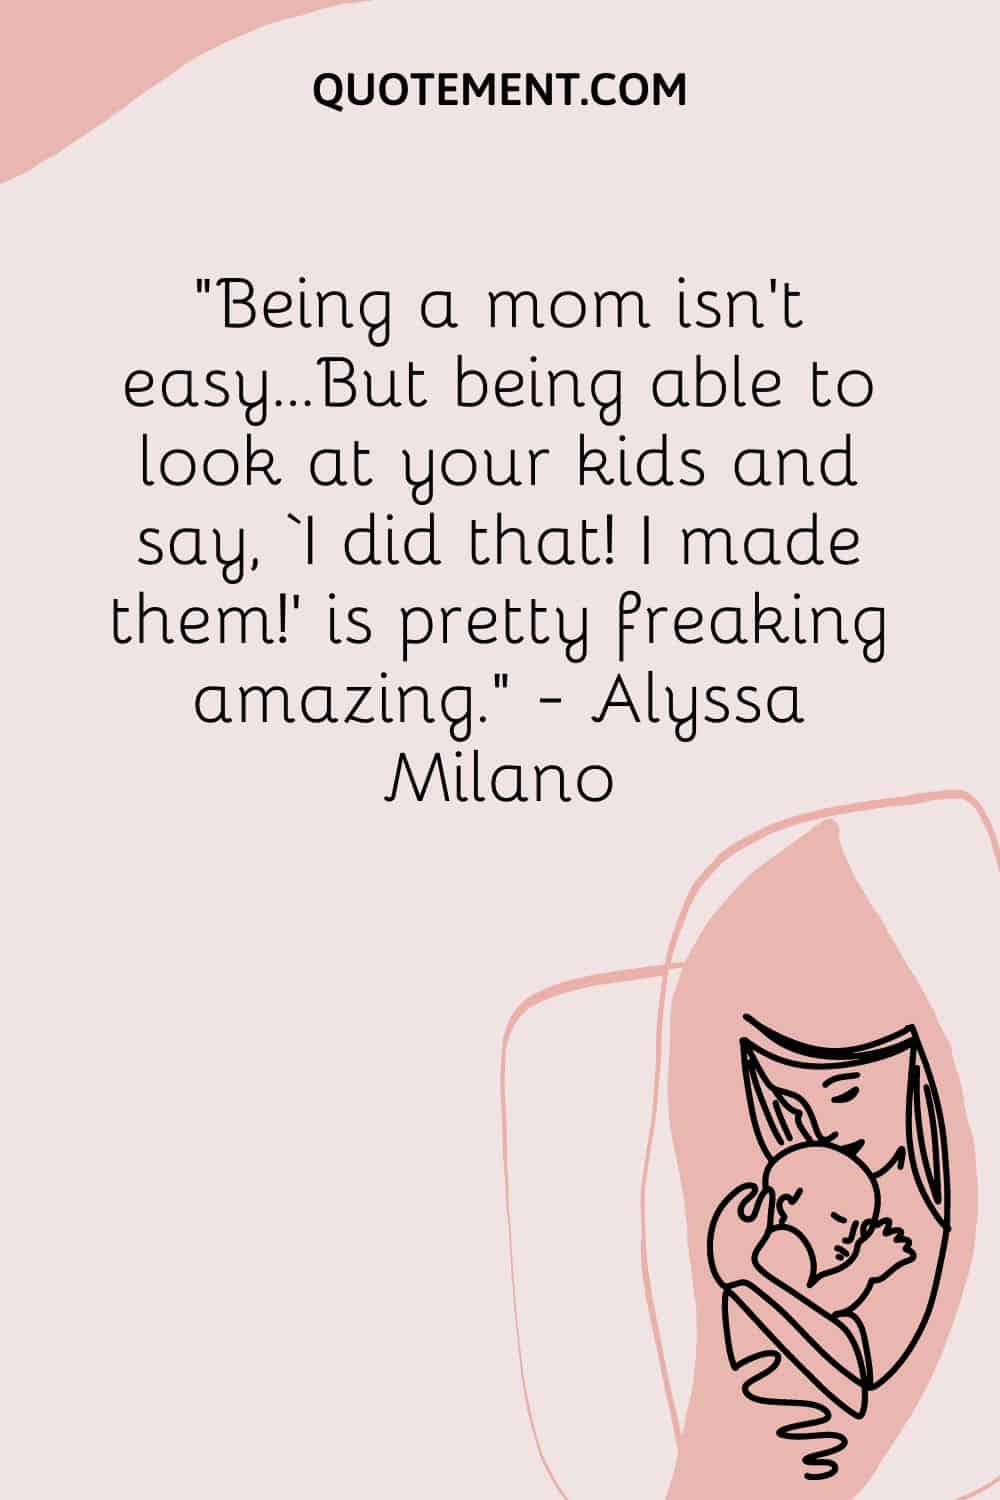 illustration of mom and baby representing quote about being a mom